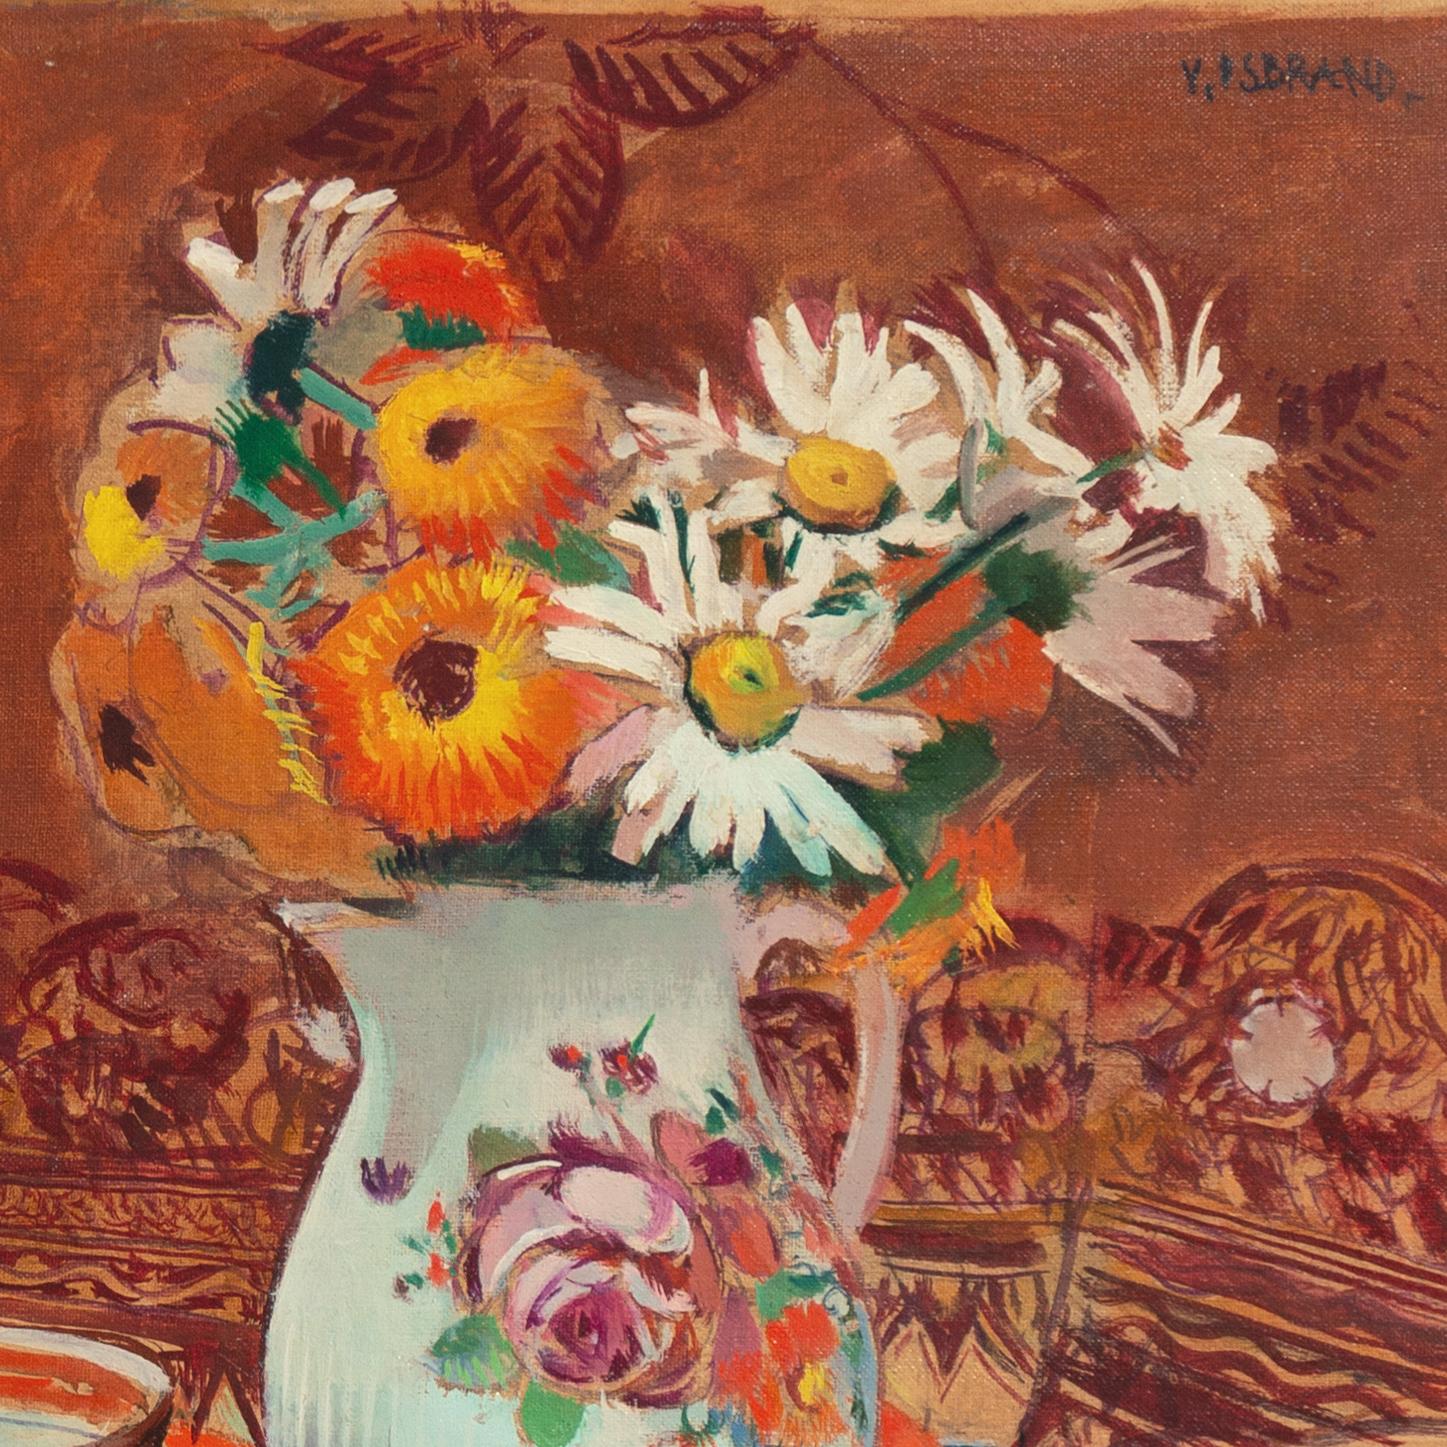 Signed upper right, 'V. Isbrand' for Victor Isbrand (Danish, 1897-1989) and painted circa 1935. 

A vibrant Post-Impressionist still-life showing golden marigolds and white daisies informally arranged in a porcelain jug, set beside a Japanese Imari